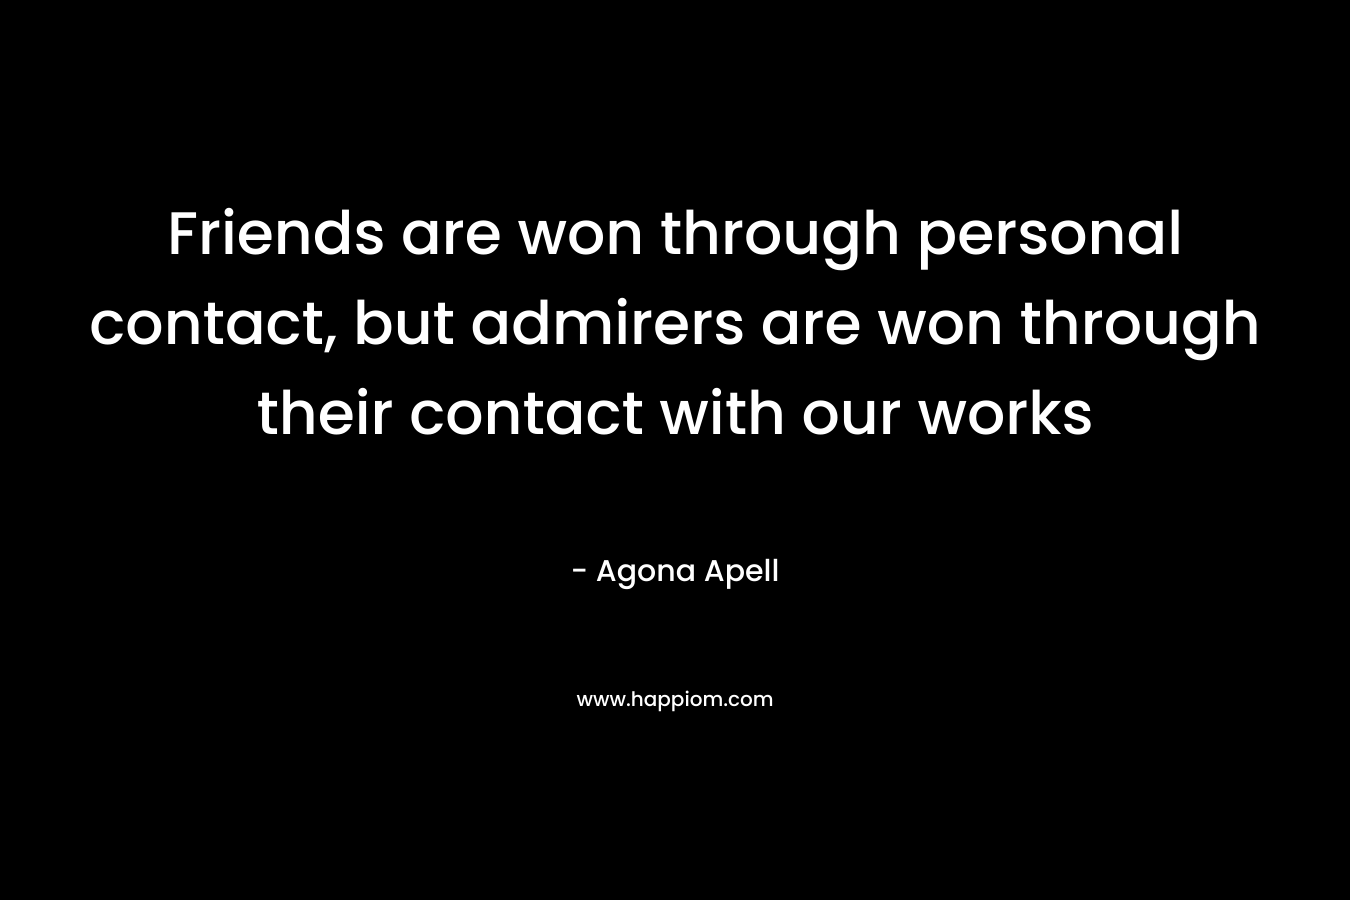 Friends are won through personal contact, but admirers are won through their contact with our works – Agona Apell